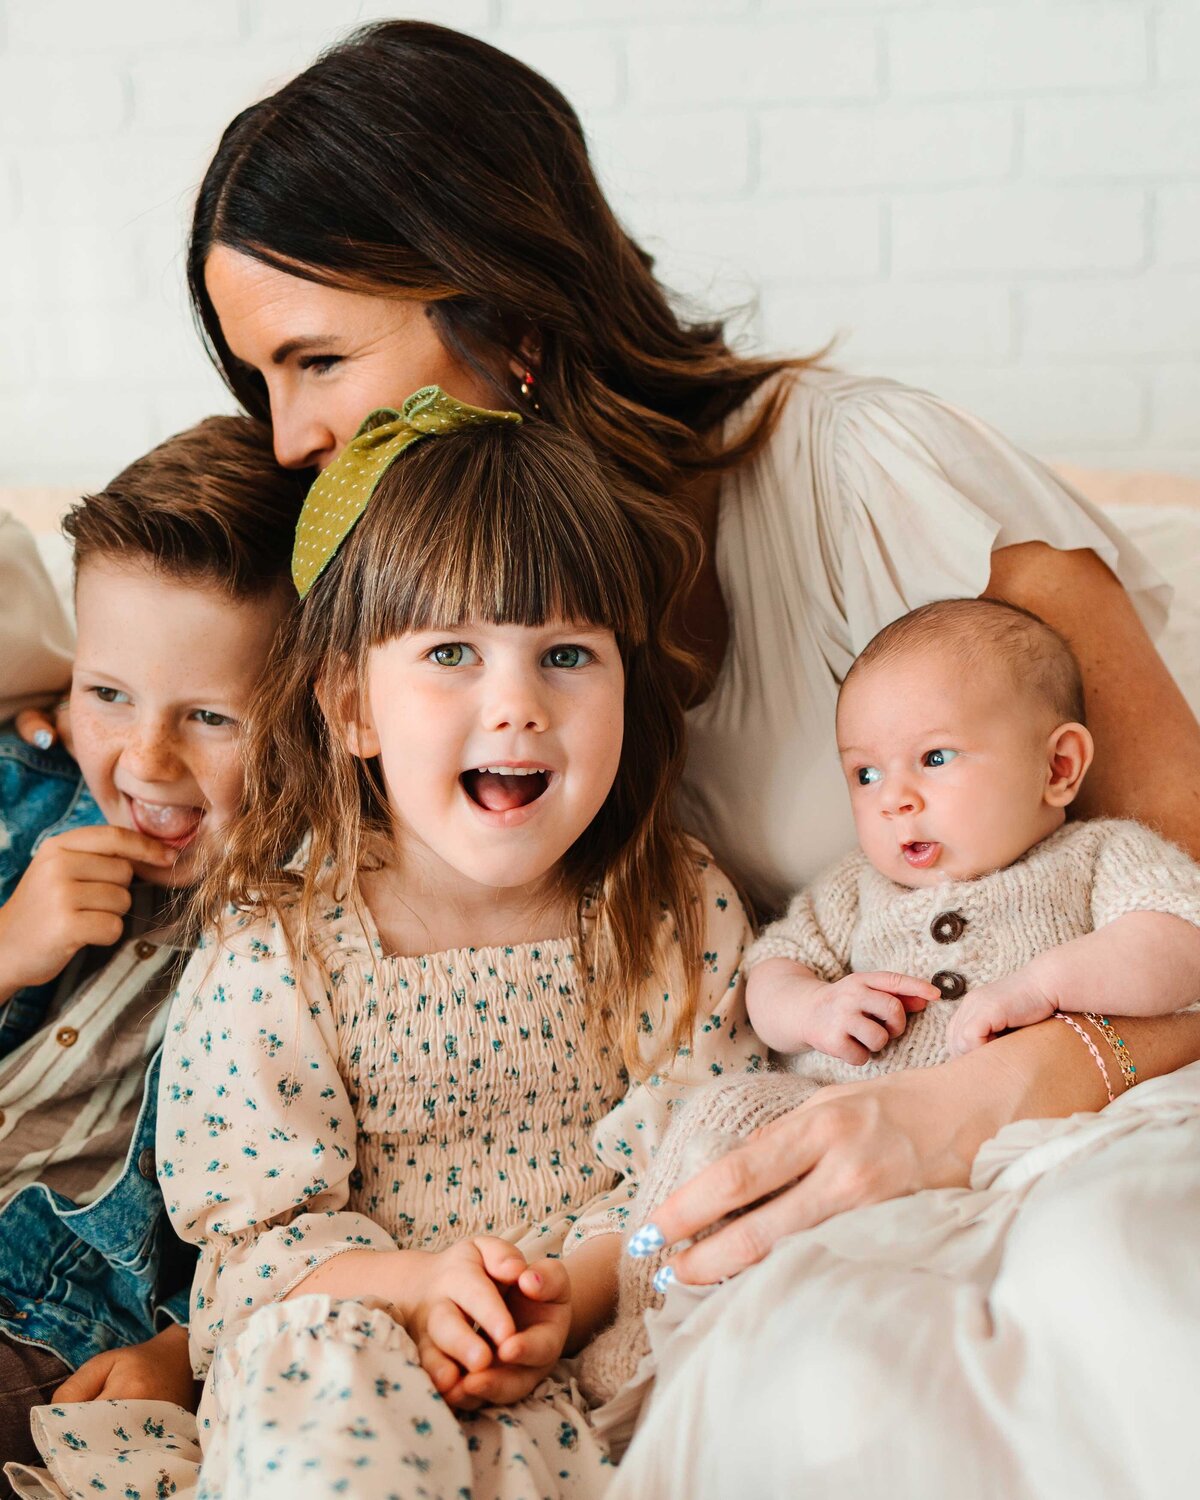 A beautiful mom happily embraces her three amazing kids during a photography session in Albuquerque. The kids are smiling, and the mom's loving hug captures a joyful and heartwarming moment.